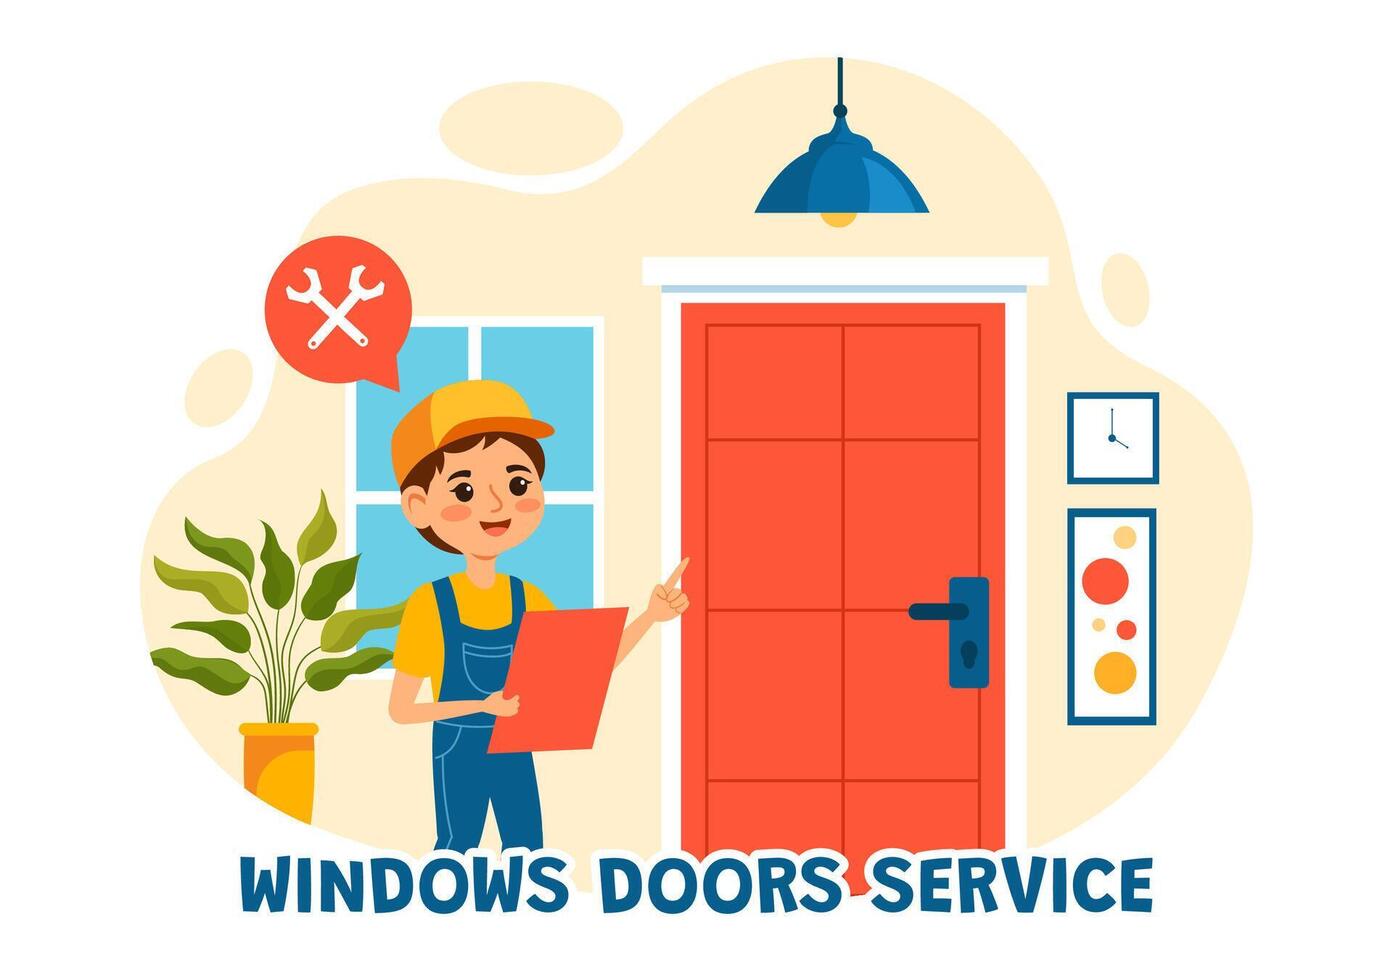 Windows and Doors Installation Service Illustration with Worker for Home Repair and Renovation use Tools in Flat Kids Cartoon Background Design vector